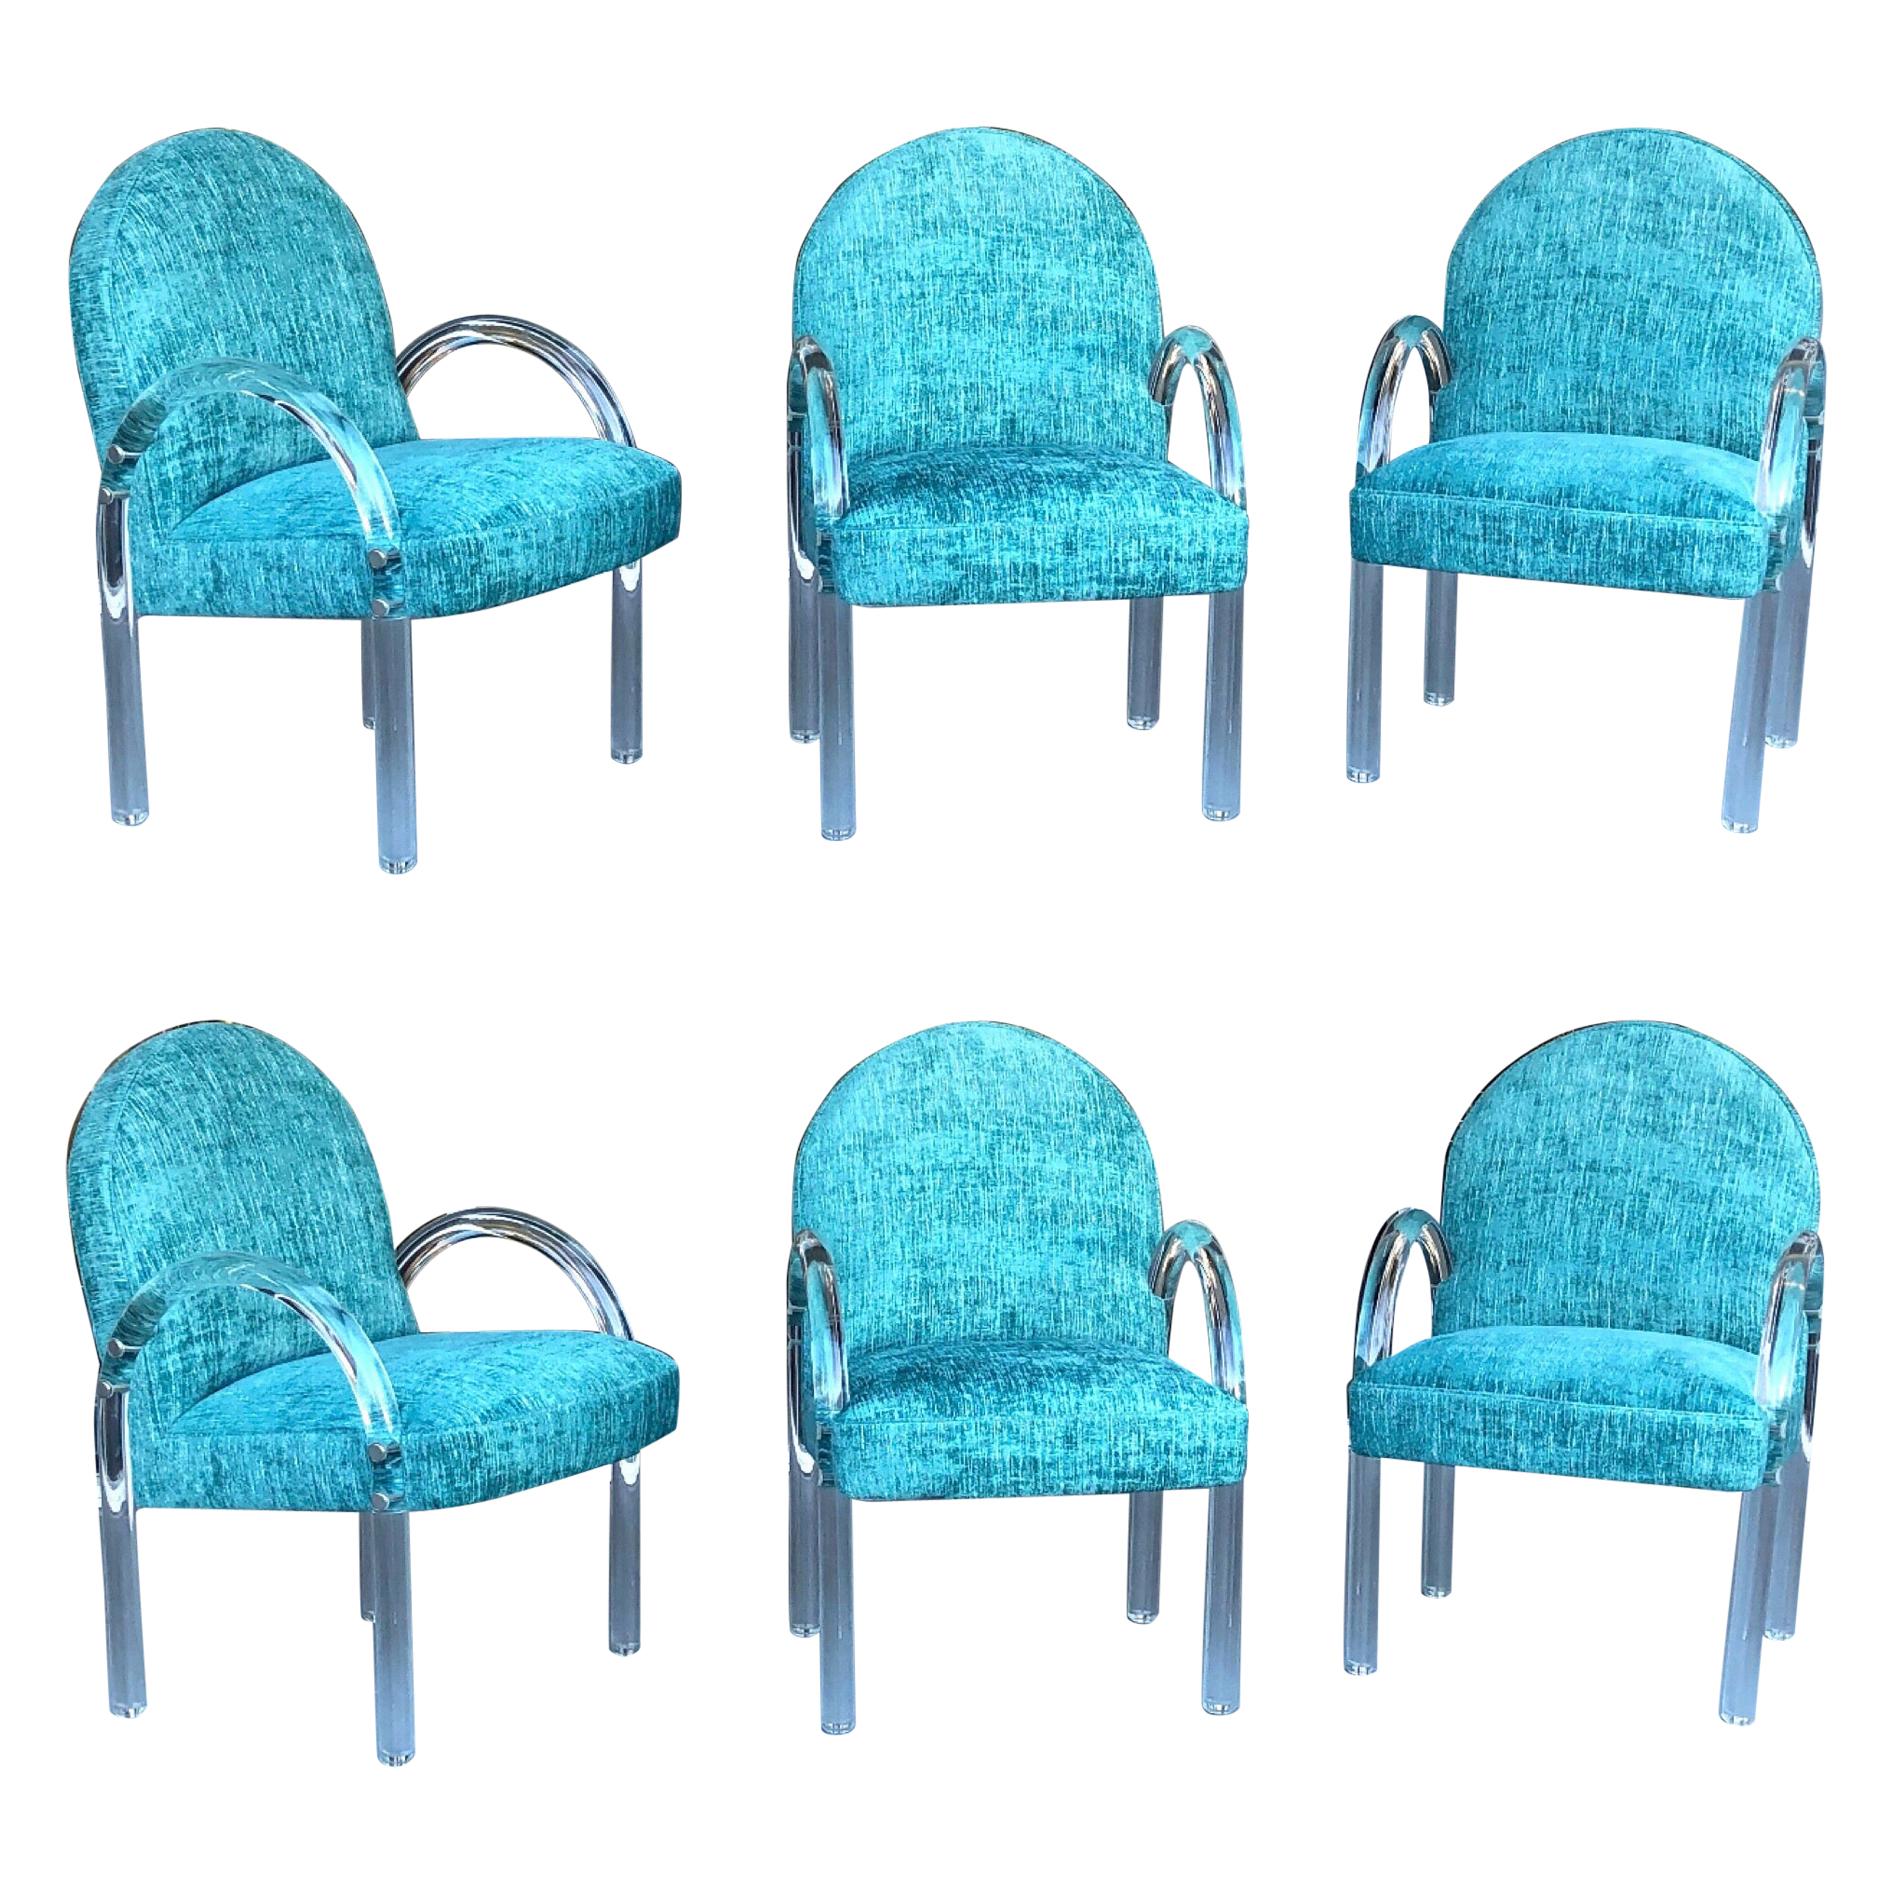 Pace Collection 6 Plush Turquoise Lucite Dining Chairs by Leon Rosen